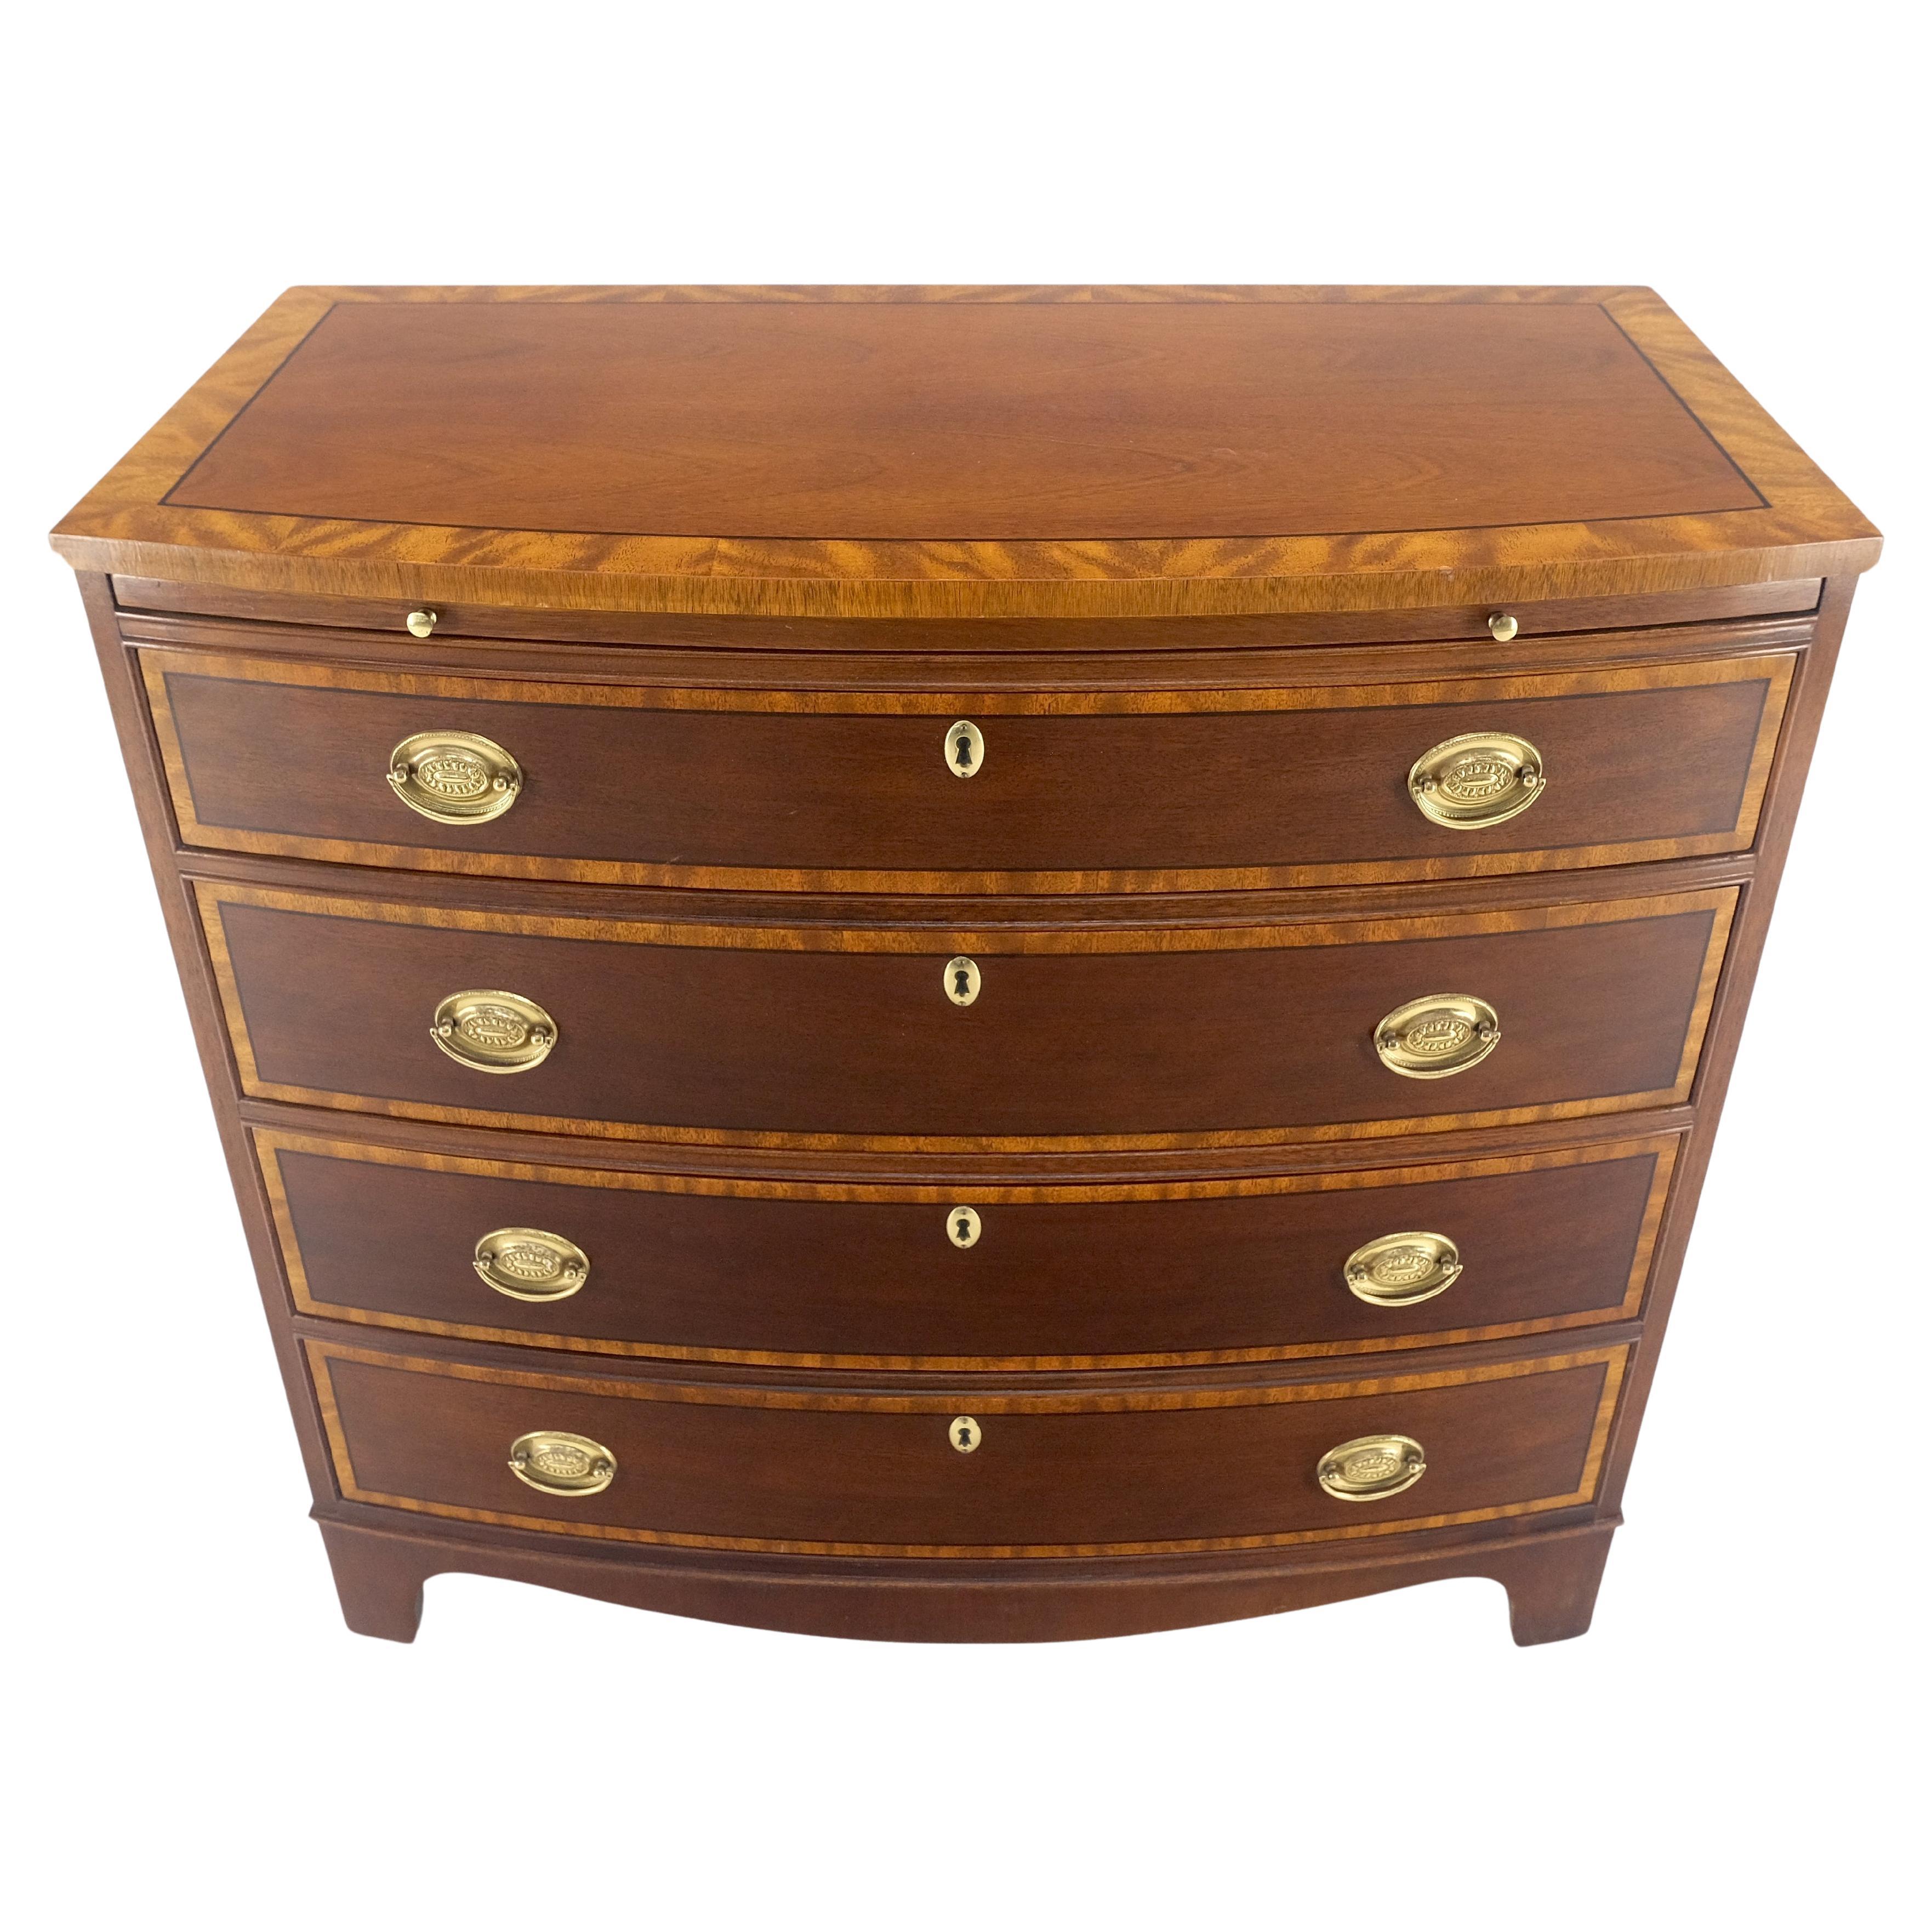 BAKER Bow Front Banded Top & 4 Drawers Pull Out Desk Bachelor Chest Dresser MINT For Sale